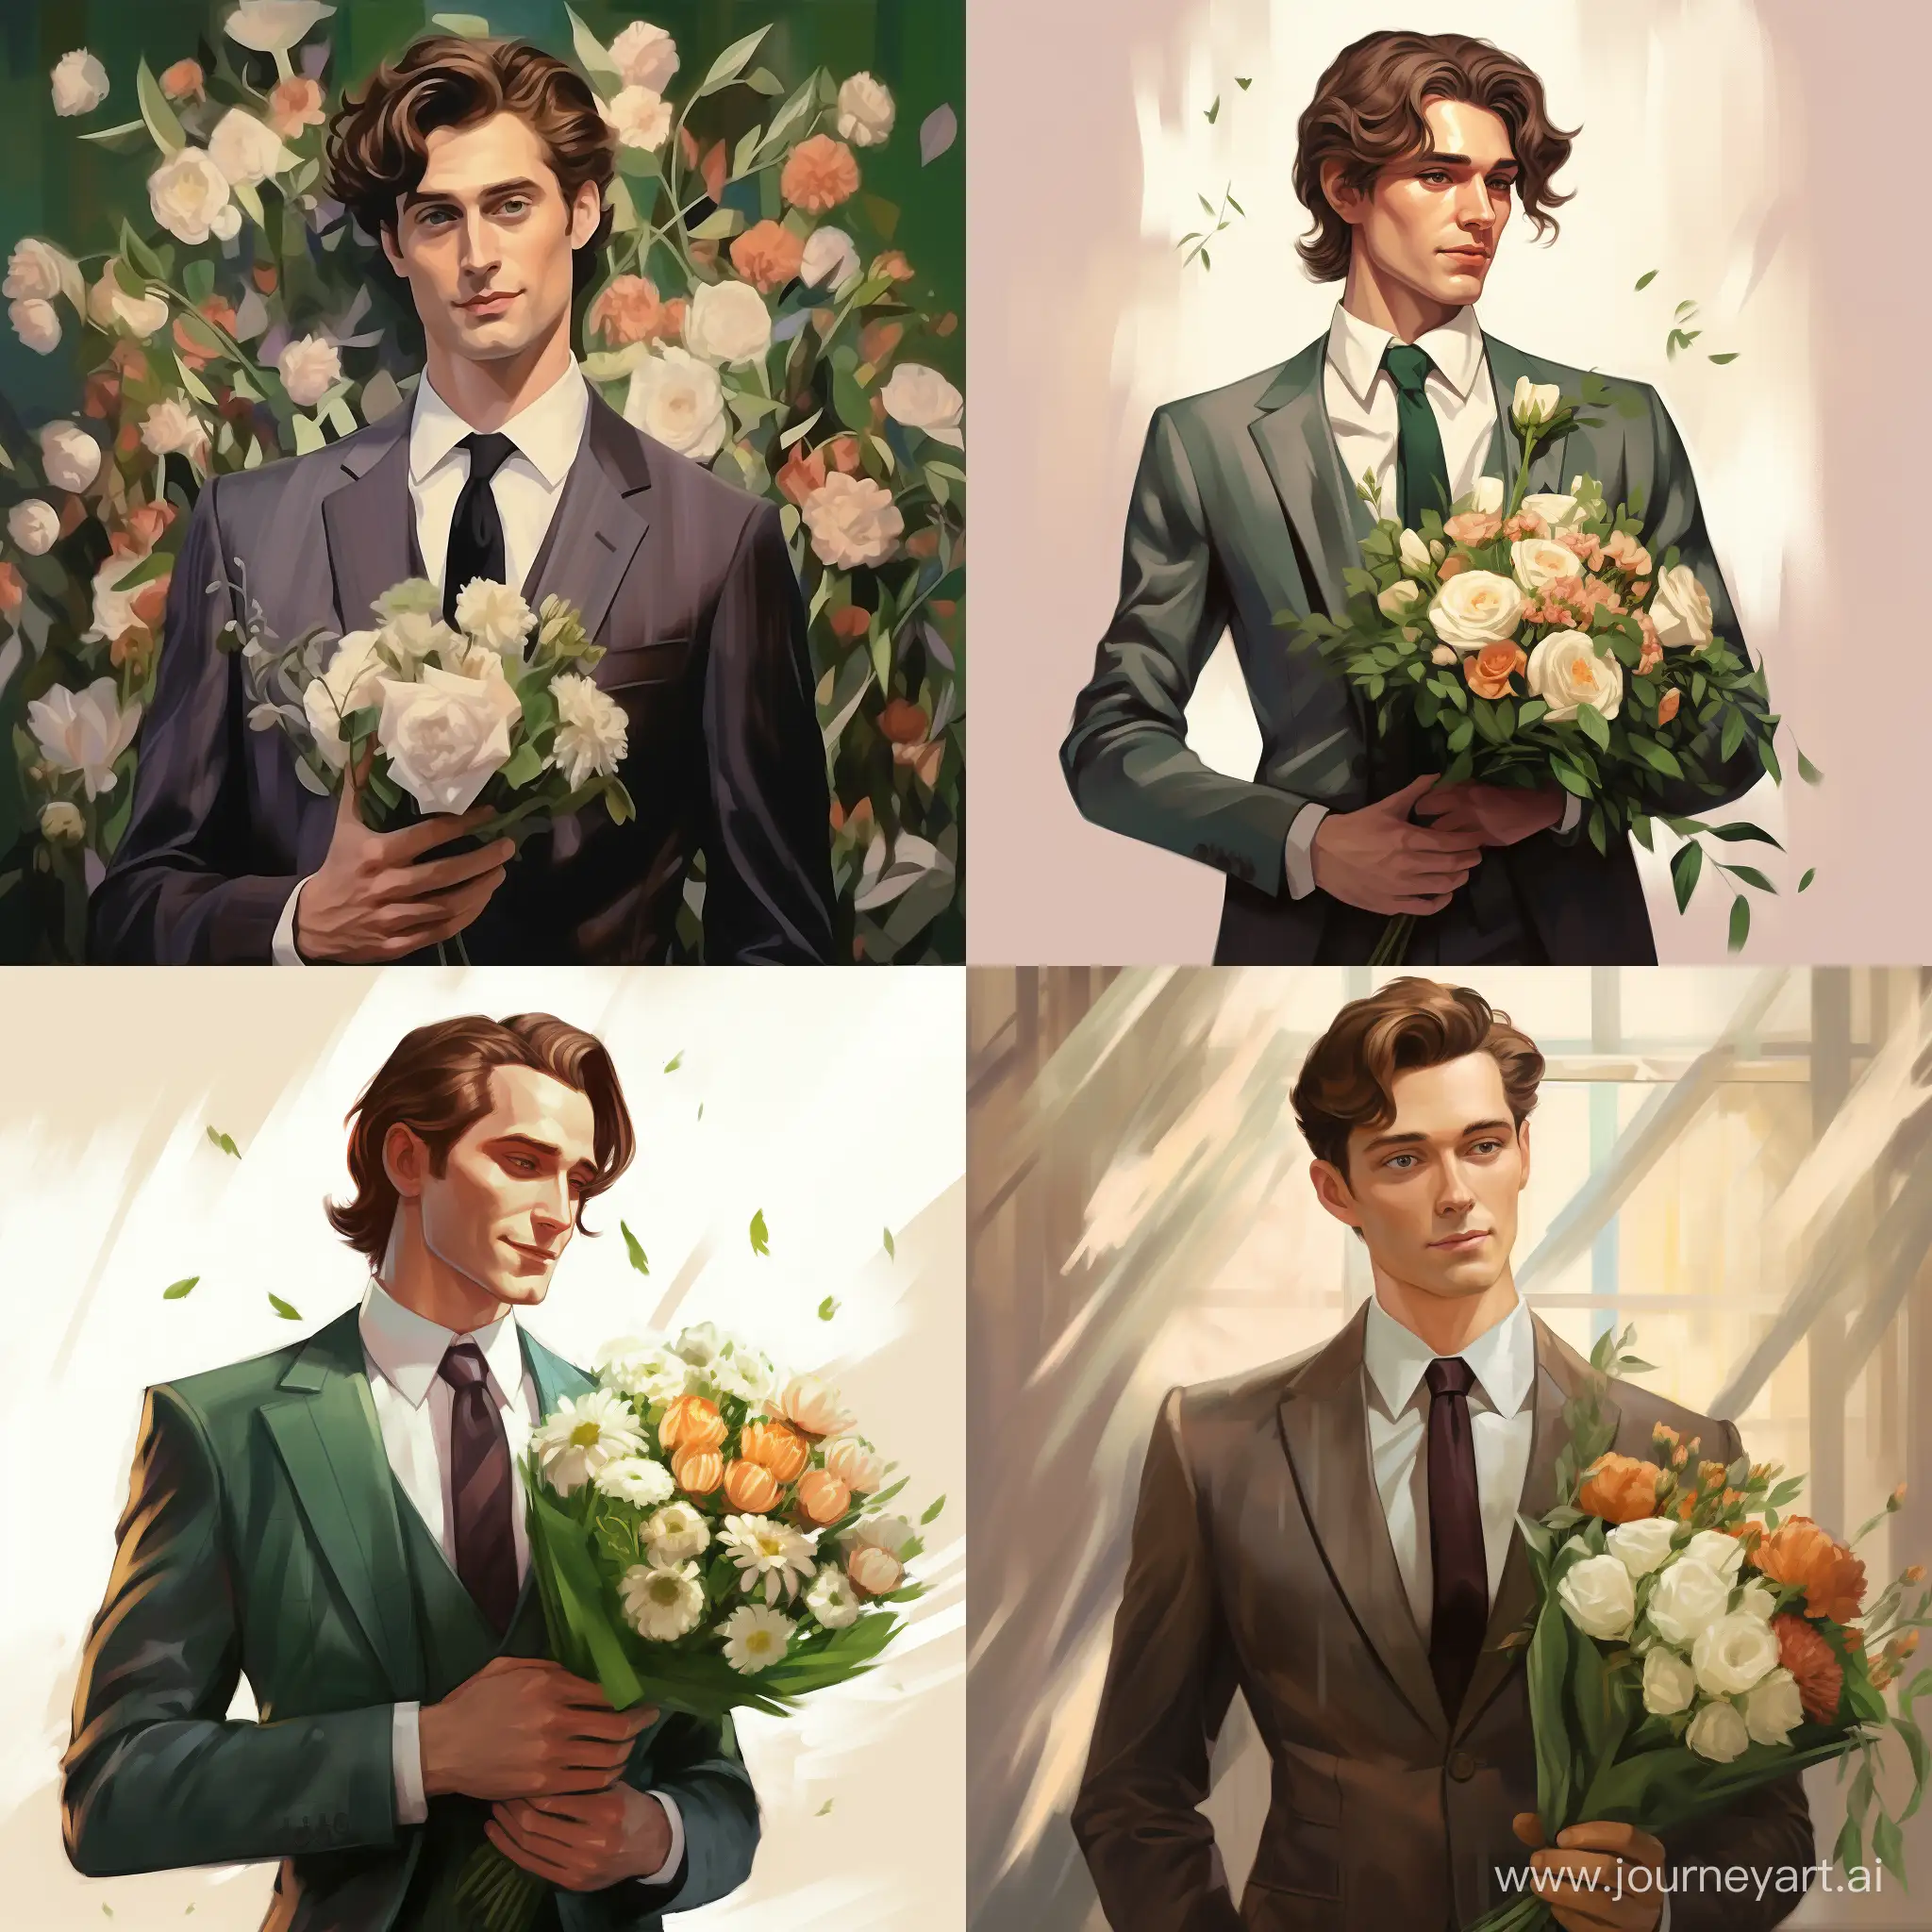 Tall-Man-in-Suit-Holding-Bouquet-of-Flowers-Genuine-Love-Portrait